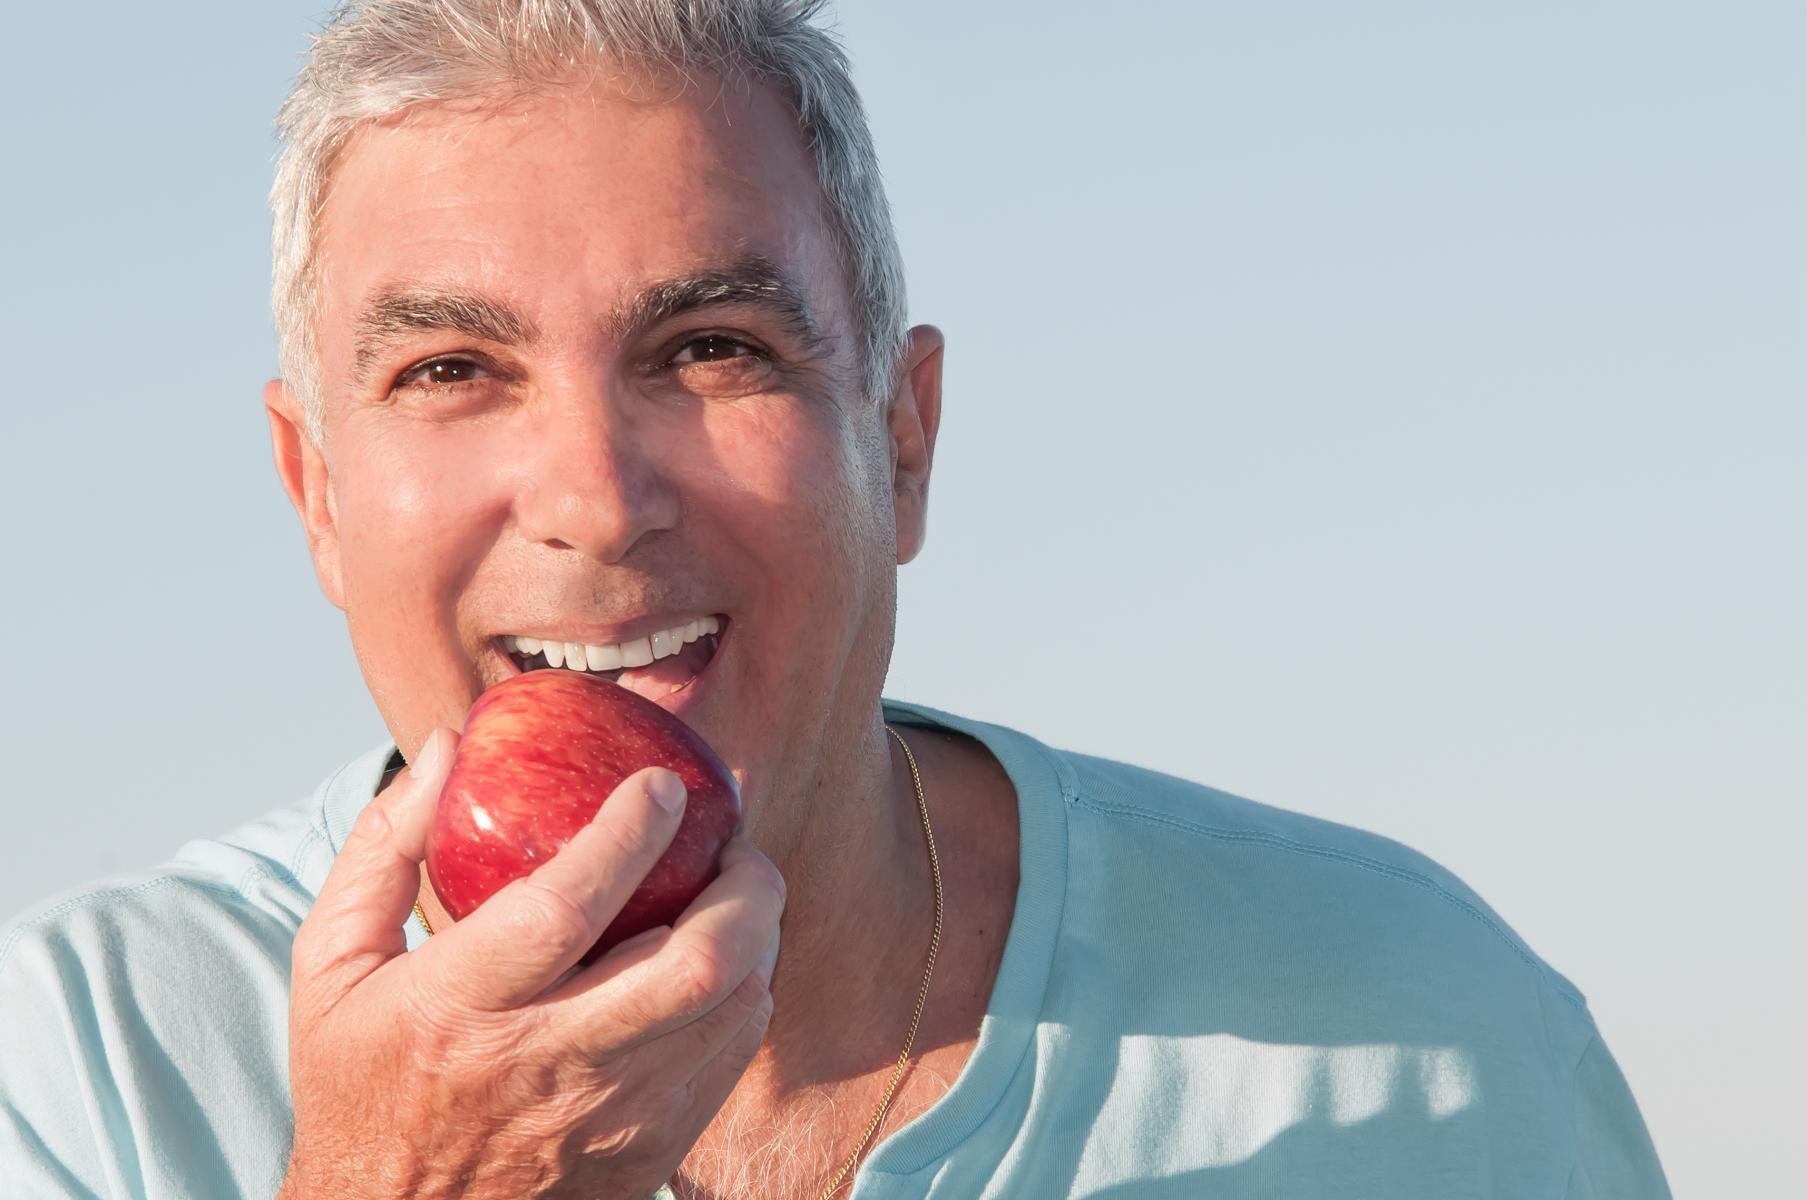 man biting apple and smiling showing teeth